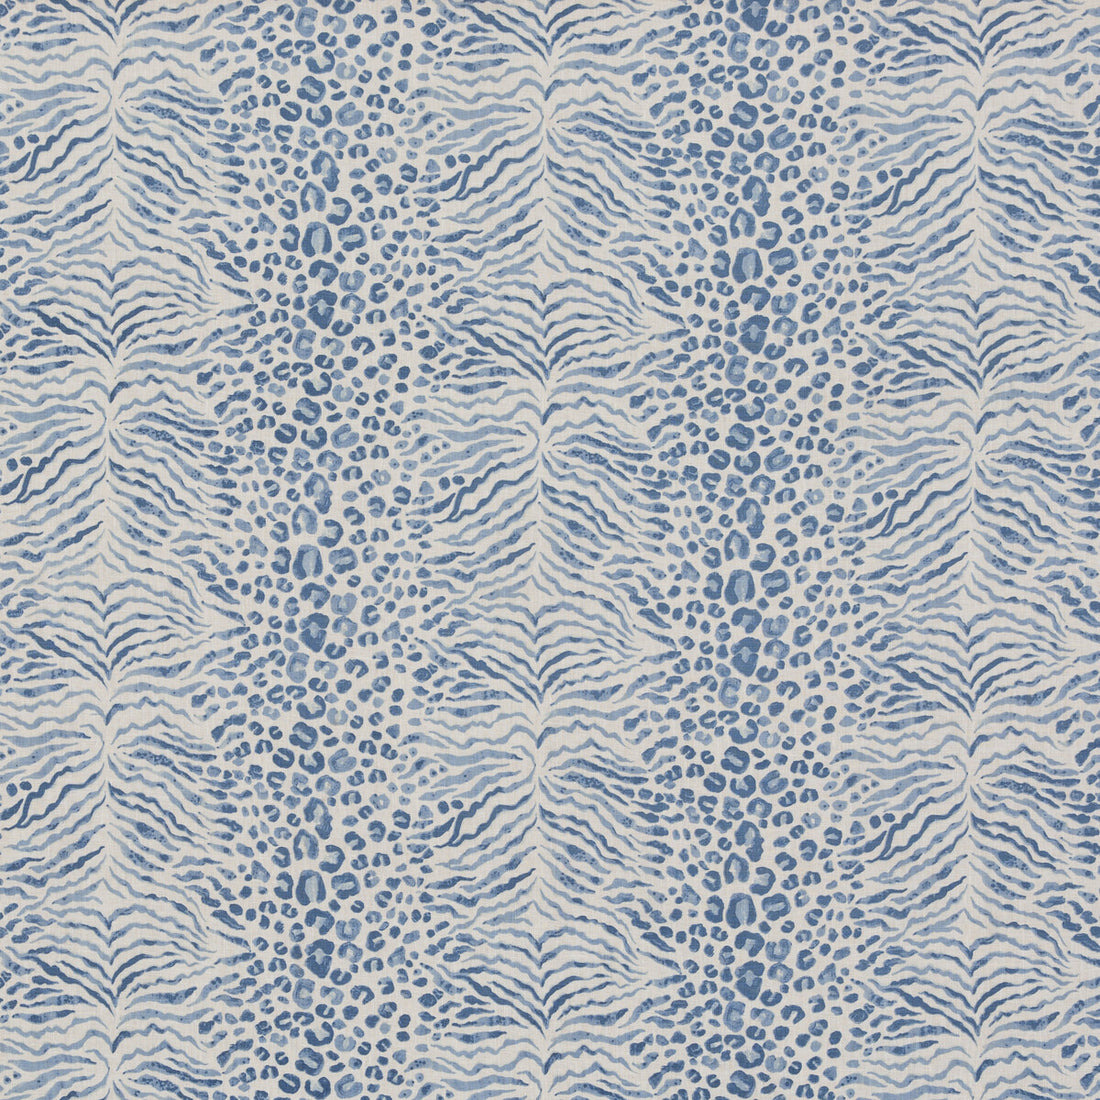 Chatto fabric in blue color - pattern BP10952.660.0 - by G P &amp; J Baker in the Ashmore collection